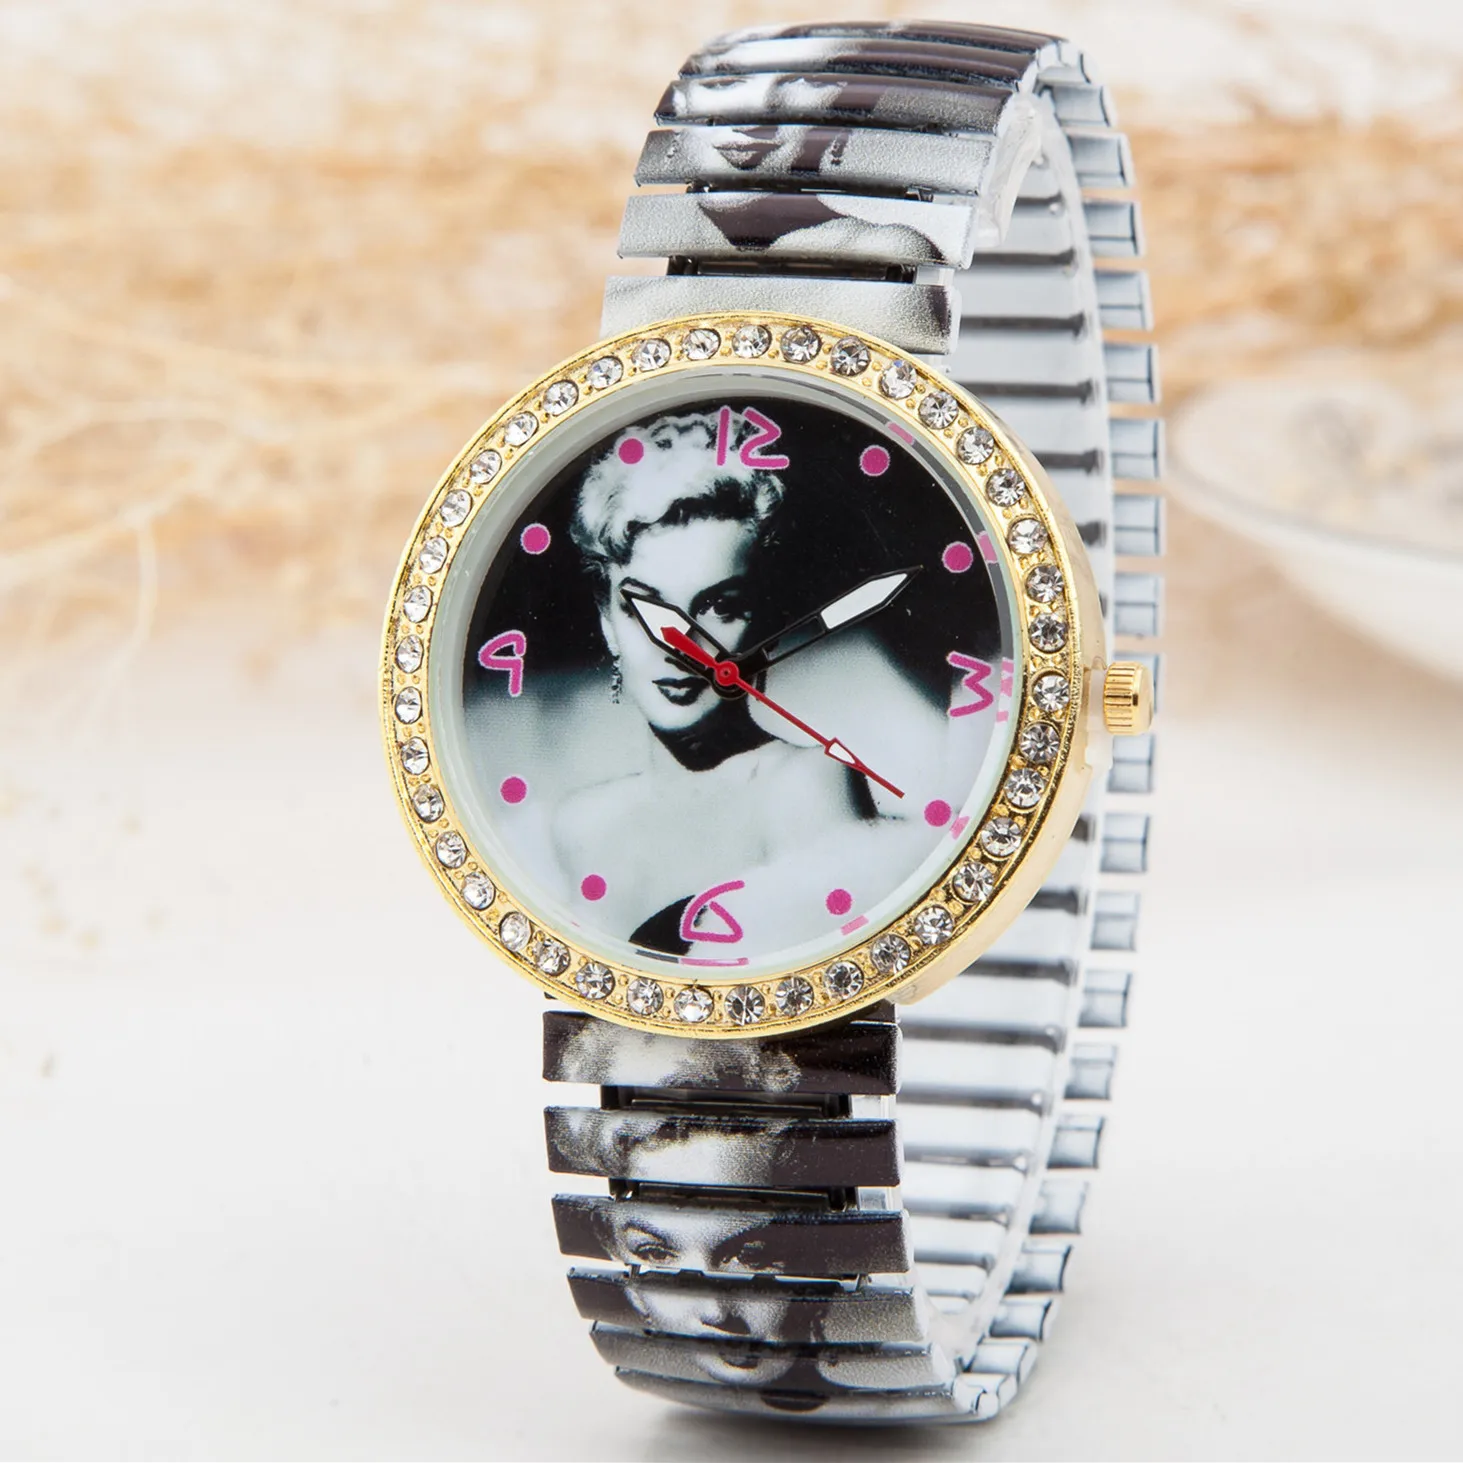 

New Women Watches Pretty Marilyn Monroe Ladies Watch Best Fashion Casual Simple Quartz Round Stainless Steel Leather Watches